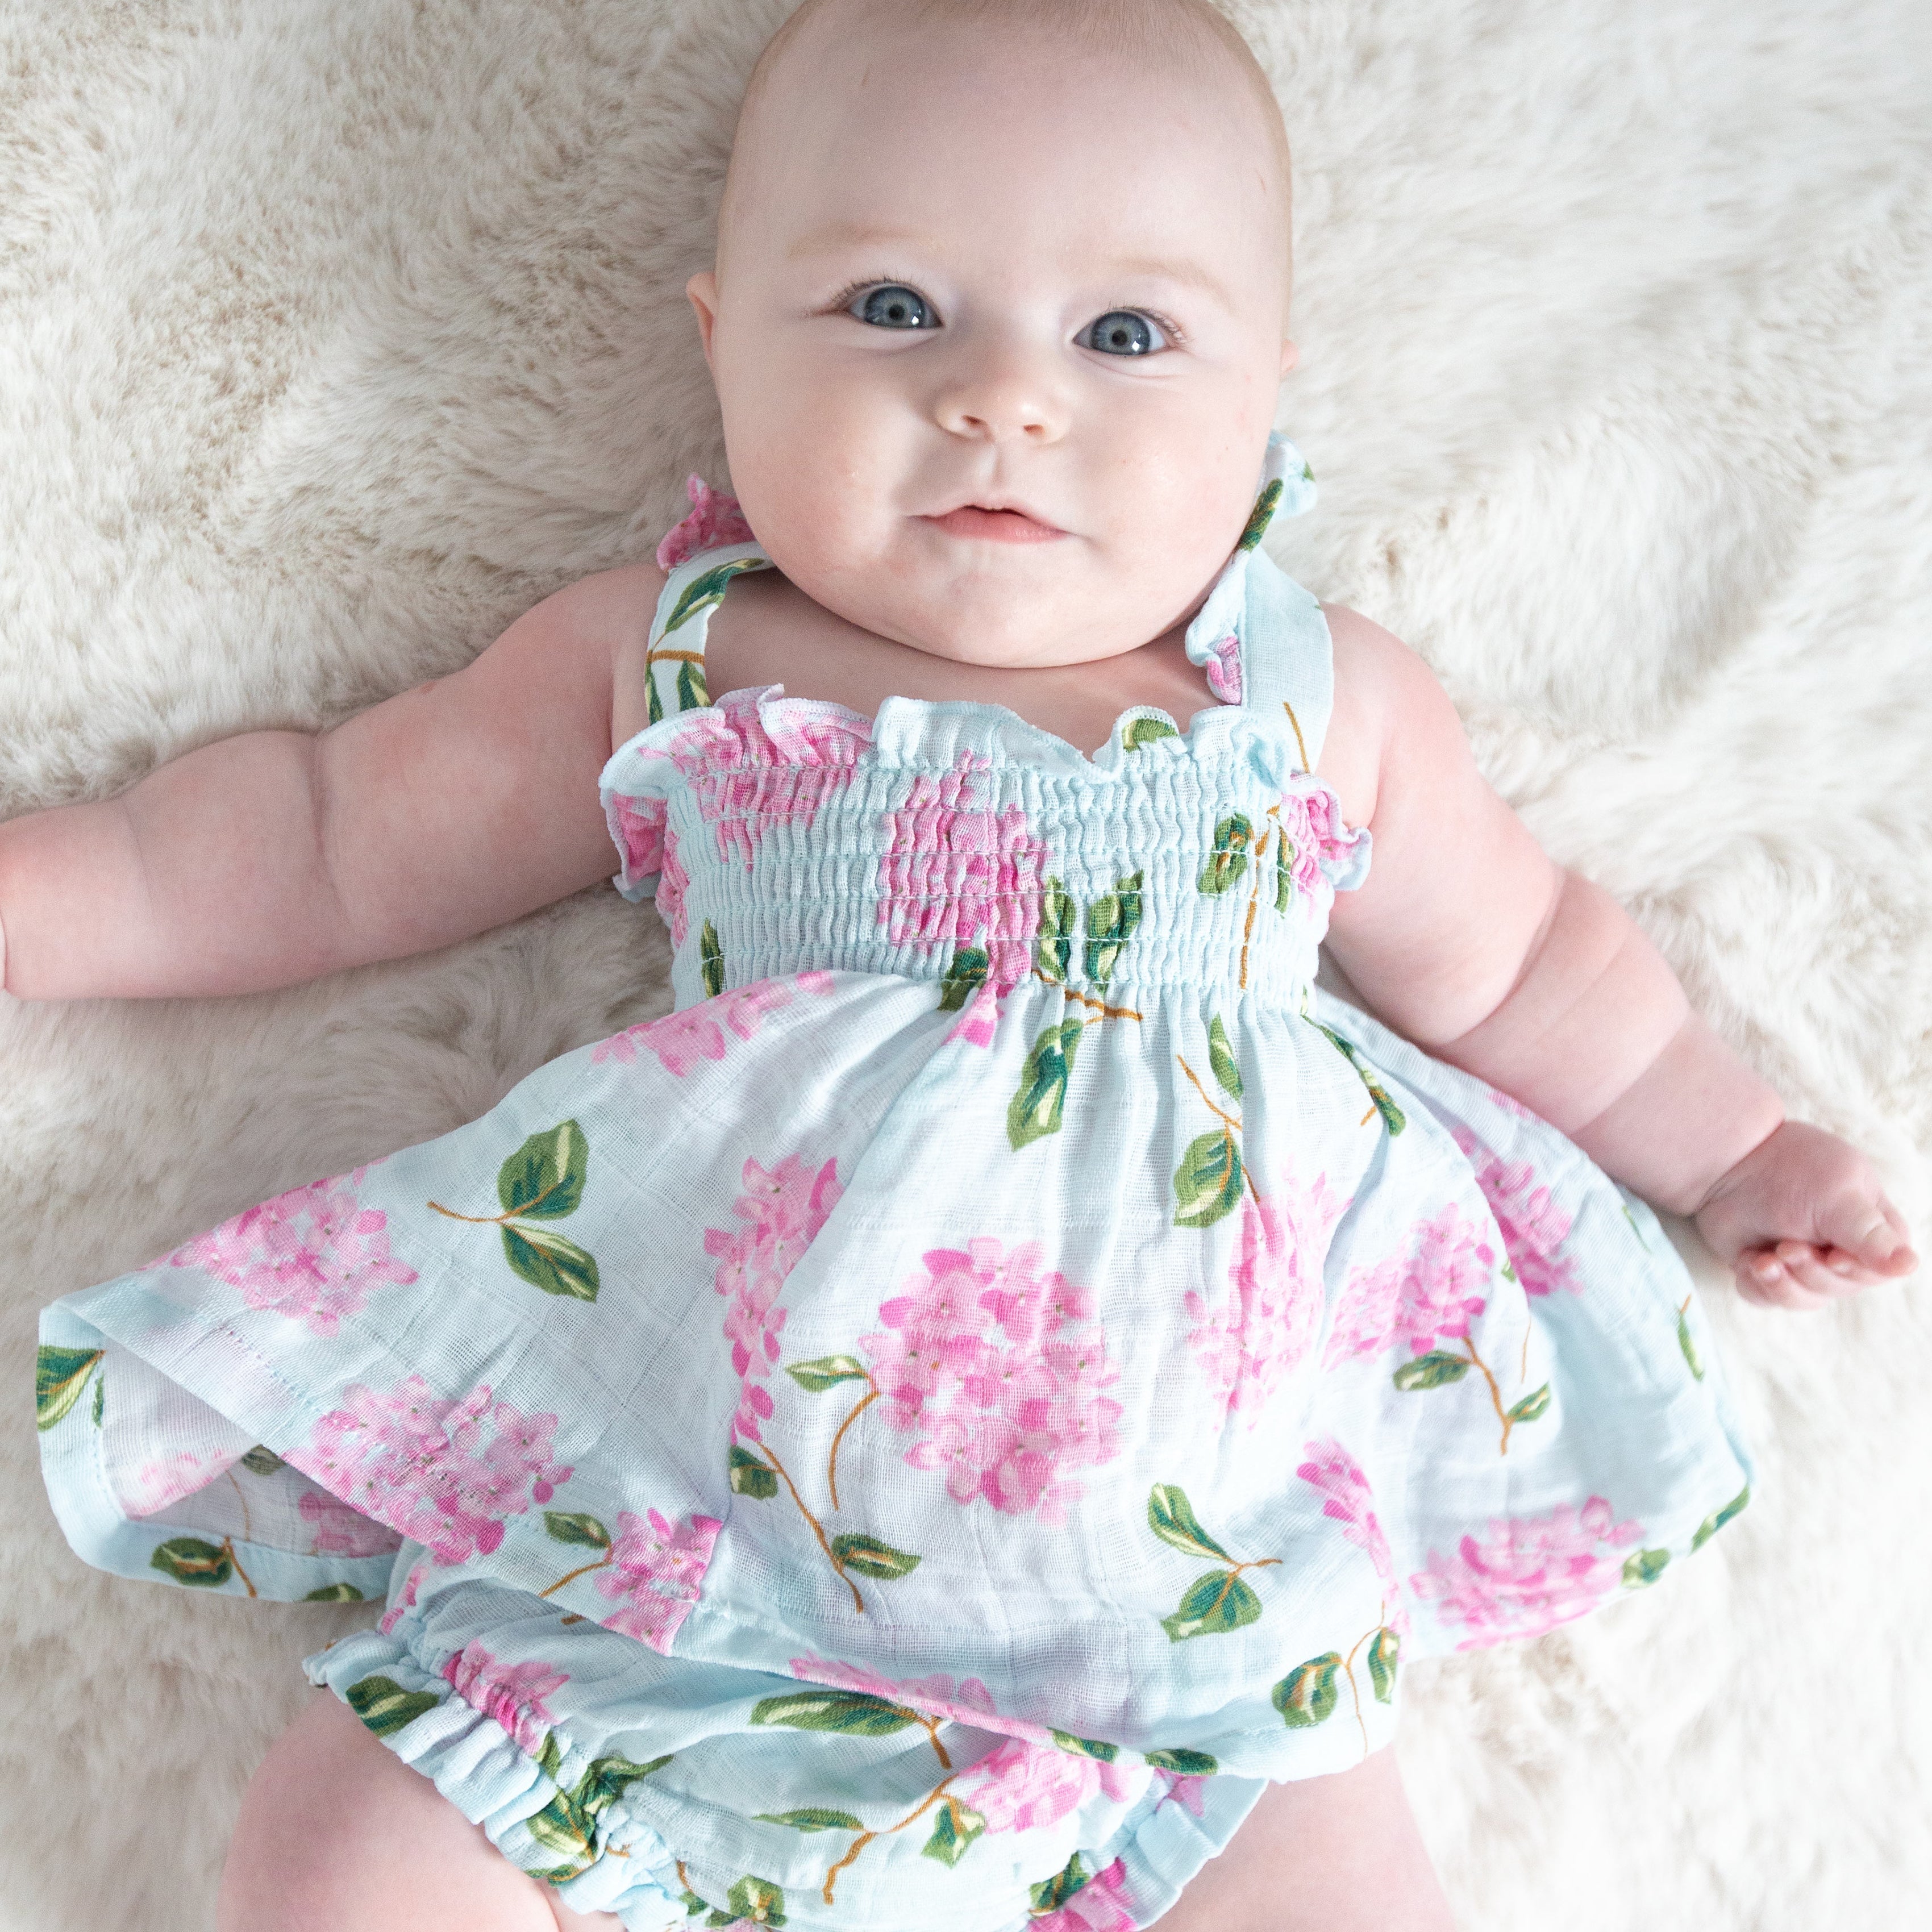 Ruffle Strap Smocked Top And Diaper Cover - Hydrangeas